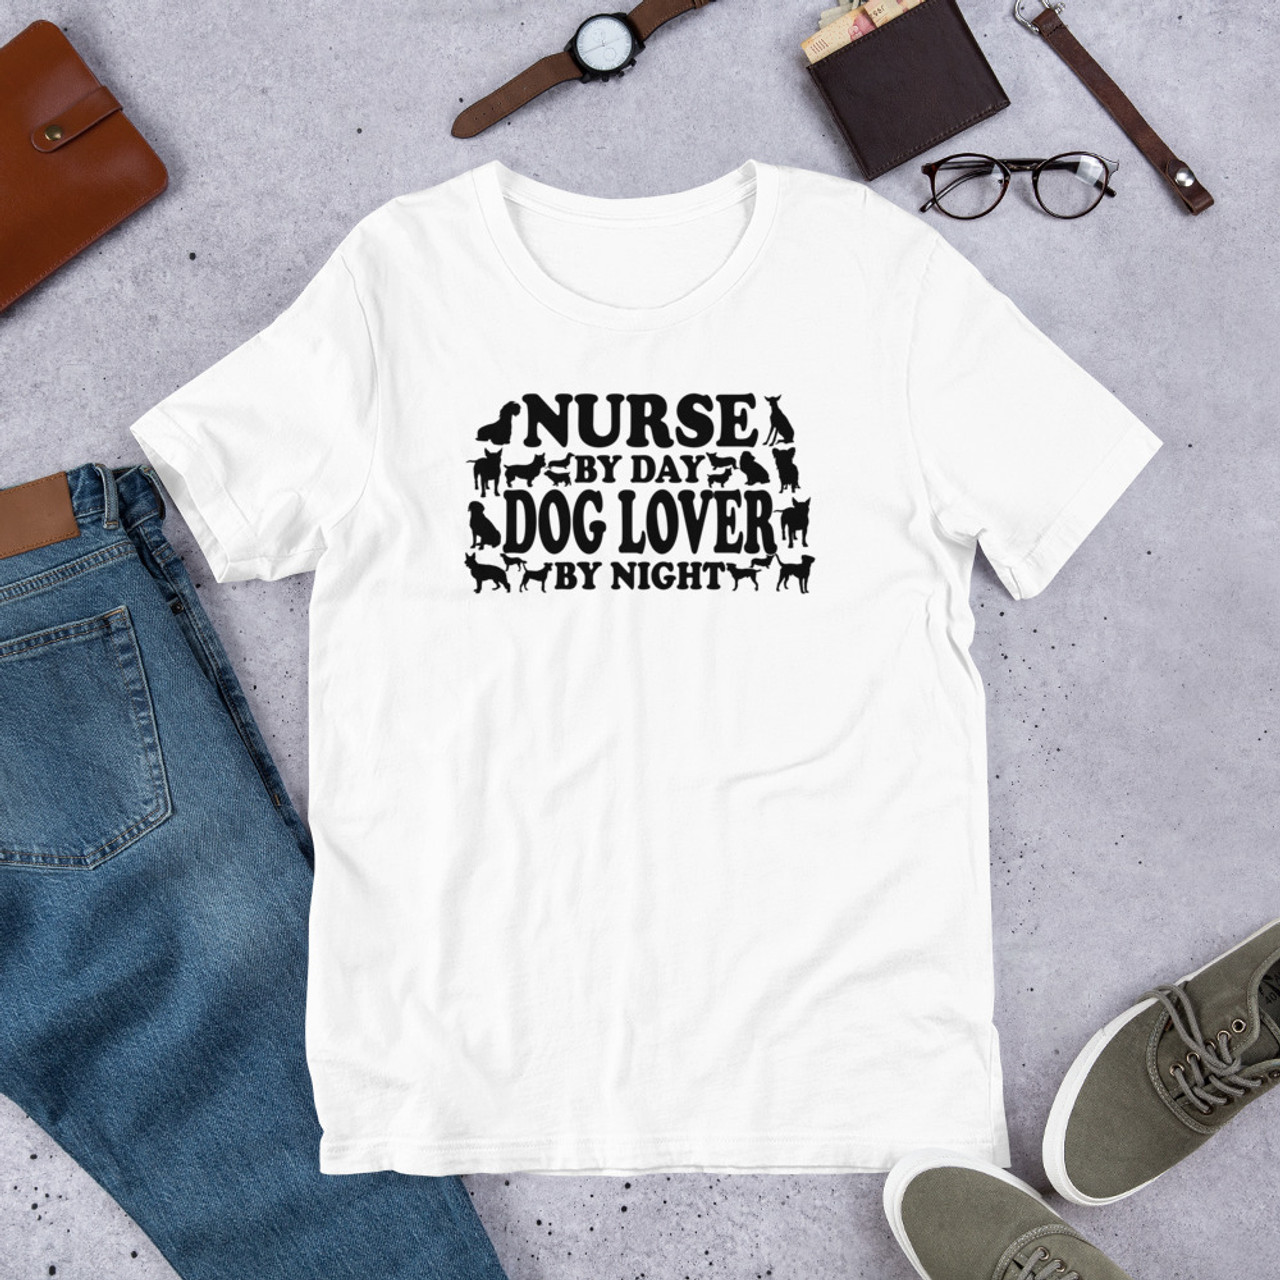 White T-Shirt - Bella + Canvas 3001 Nurse By Day Dog Lover By Night